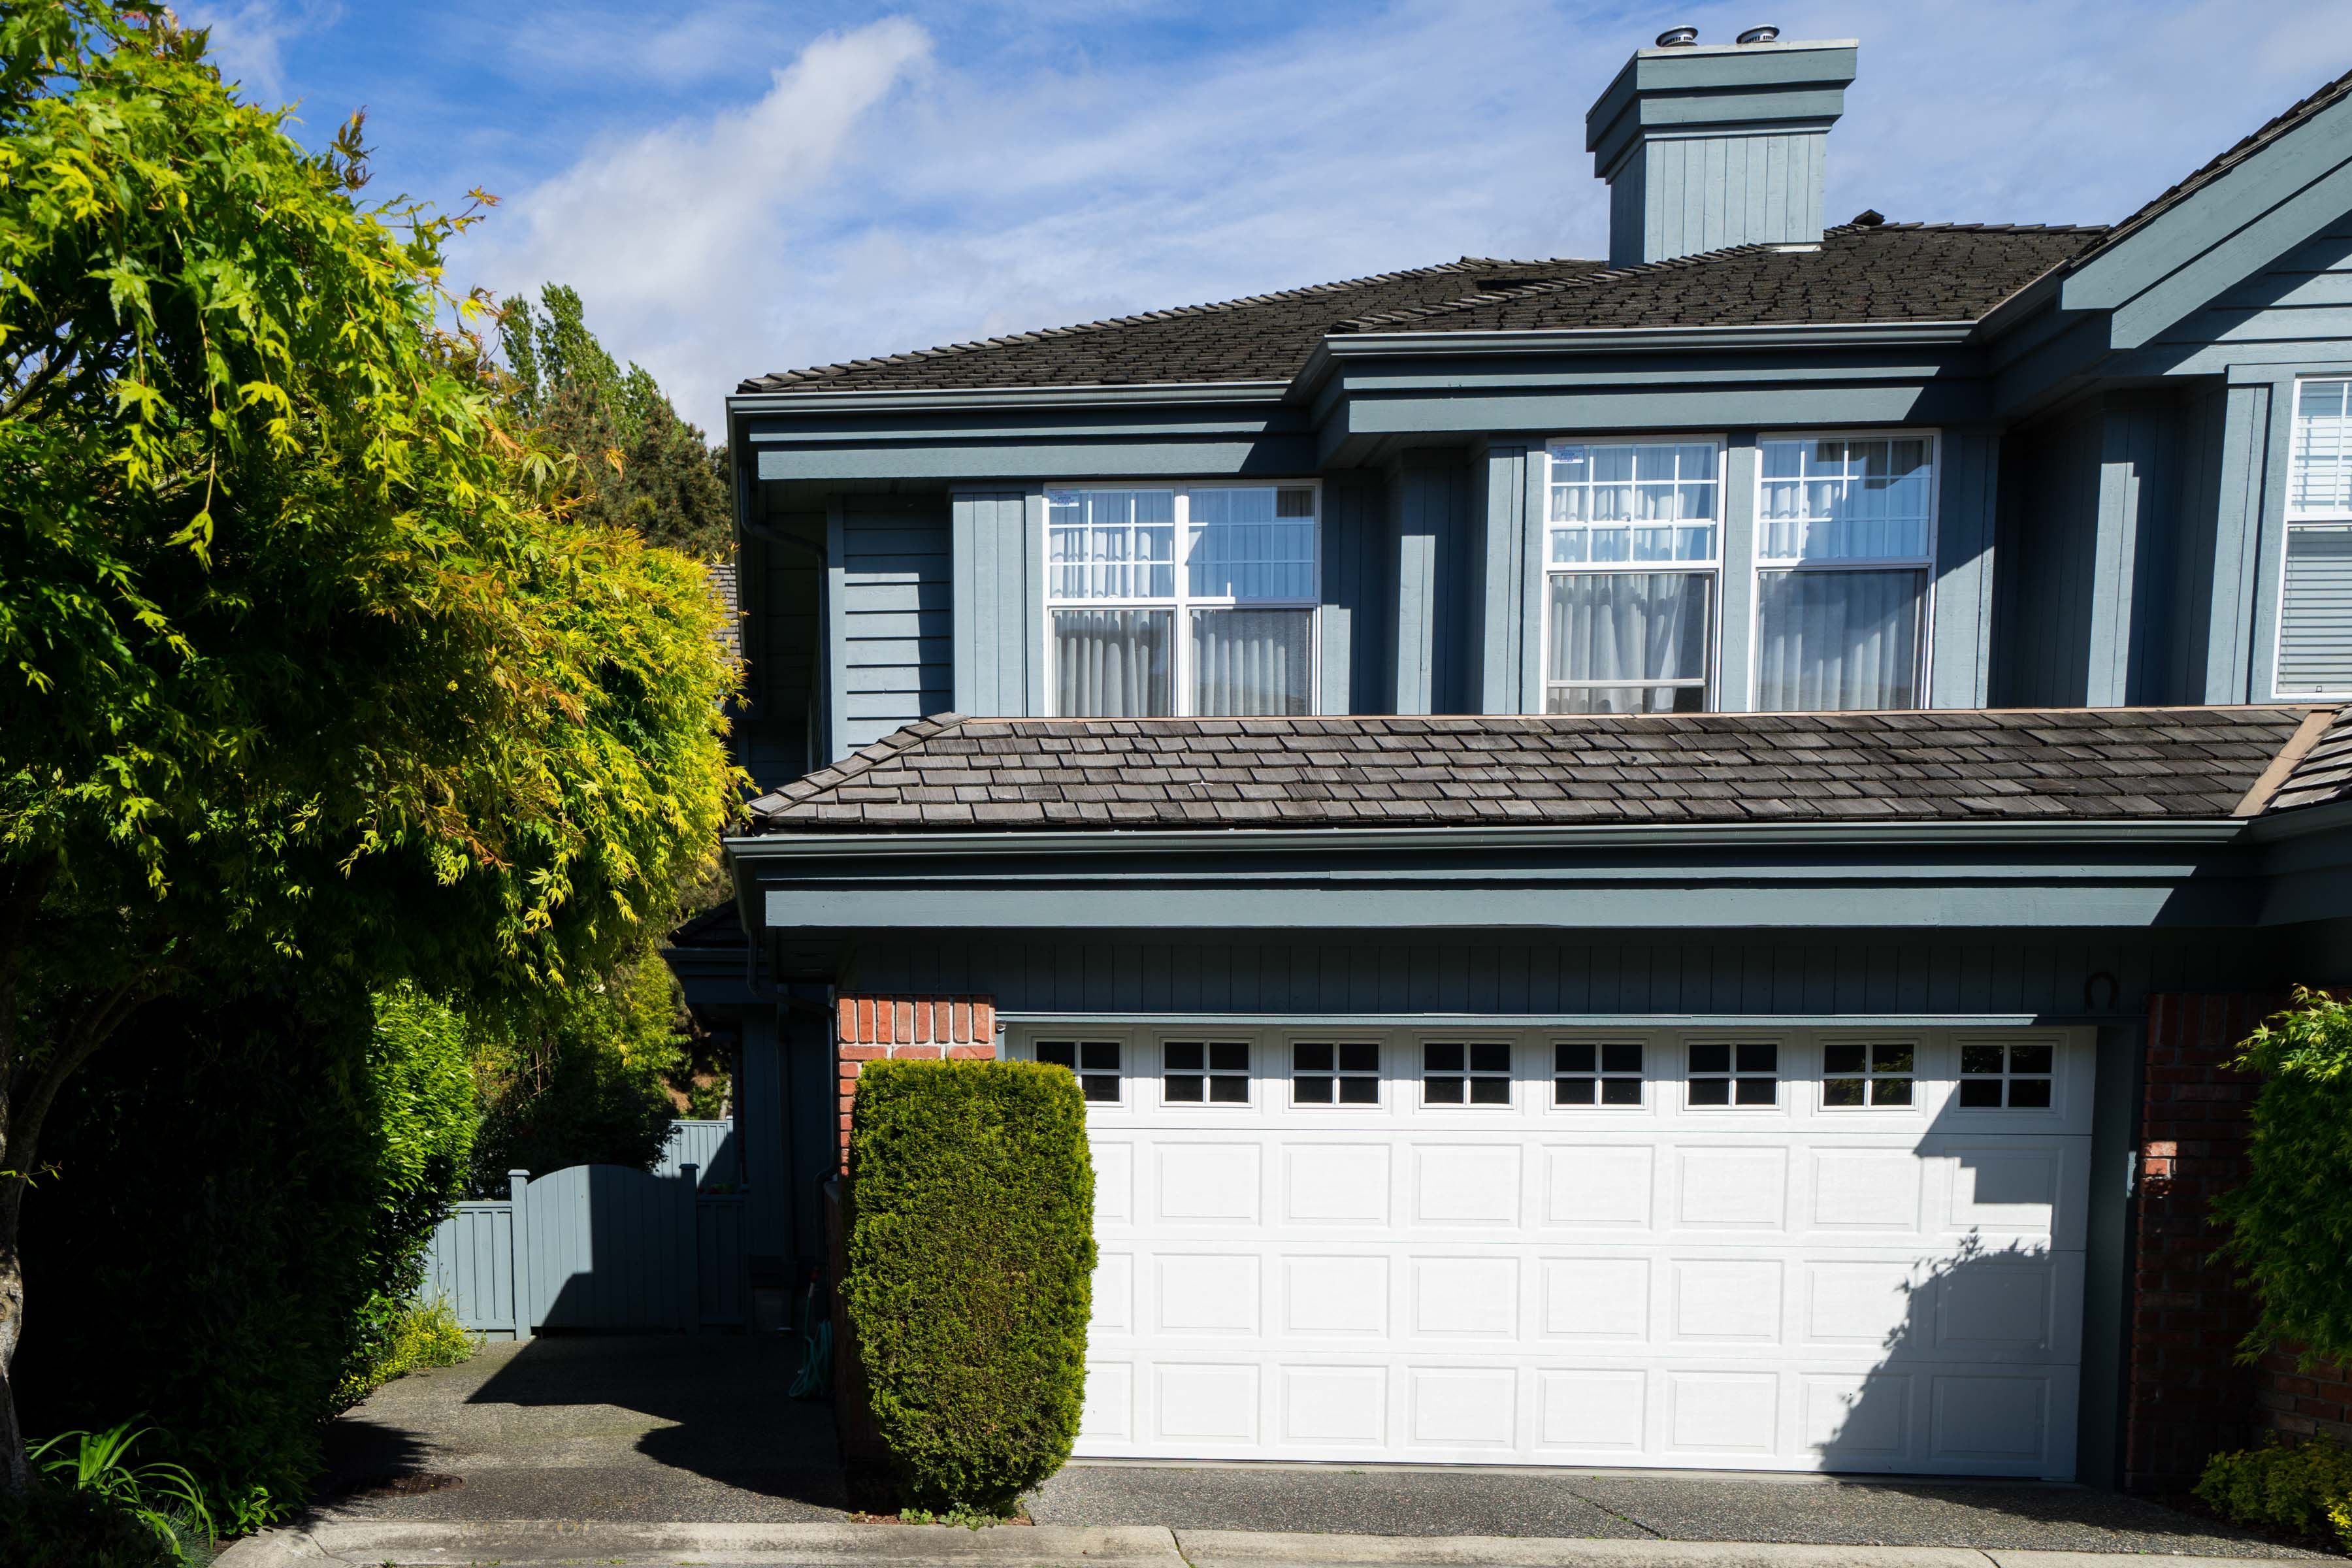 Main Photo: 4 8171 Steveston Hwy in THE MAPLES: South Arm Home for sale ()  : MLS®# V1119933